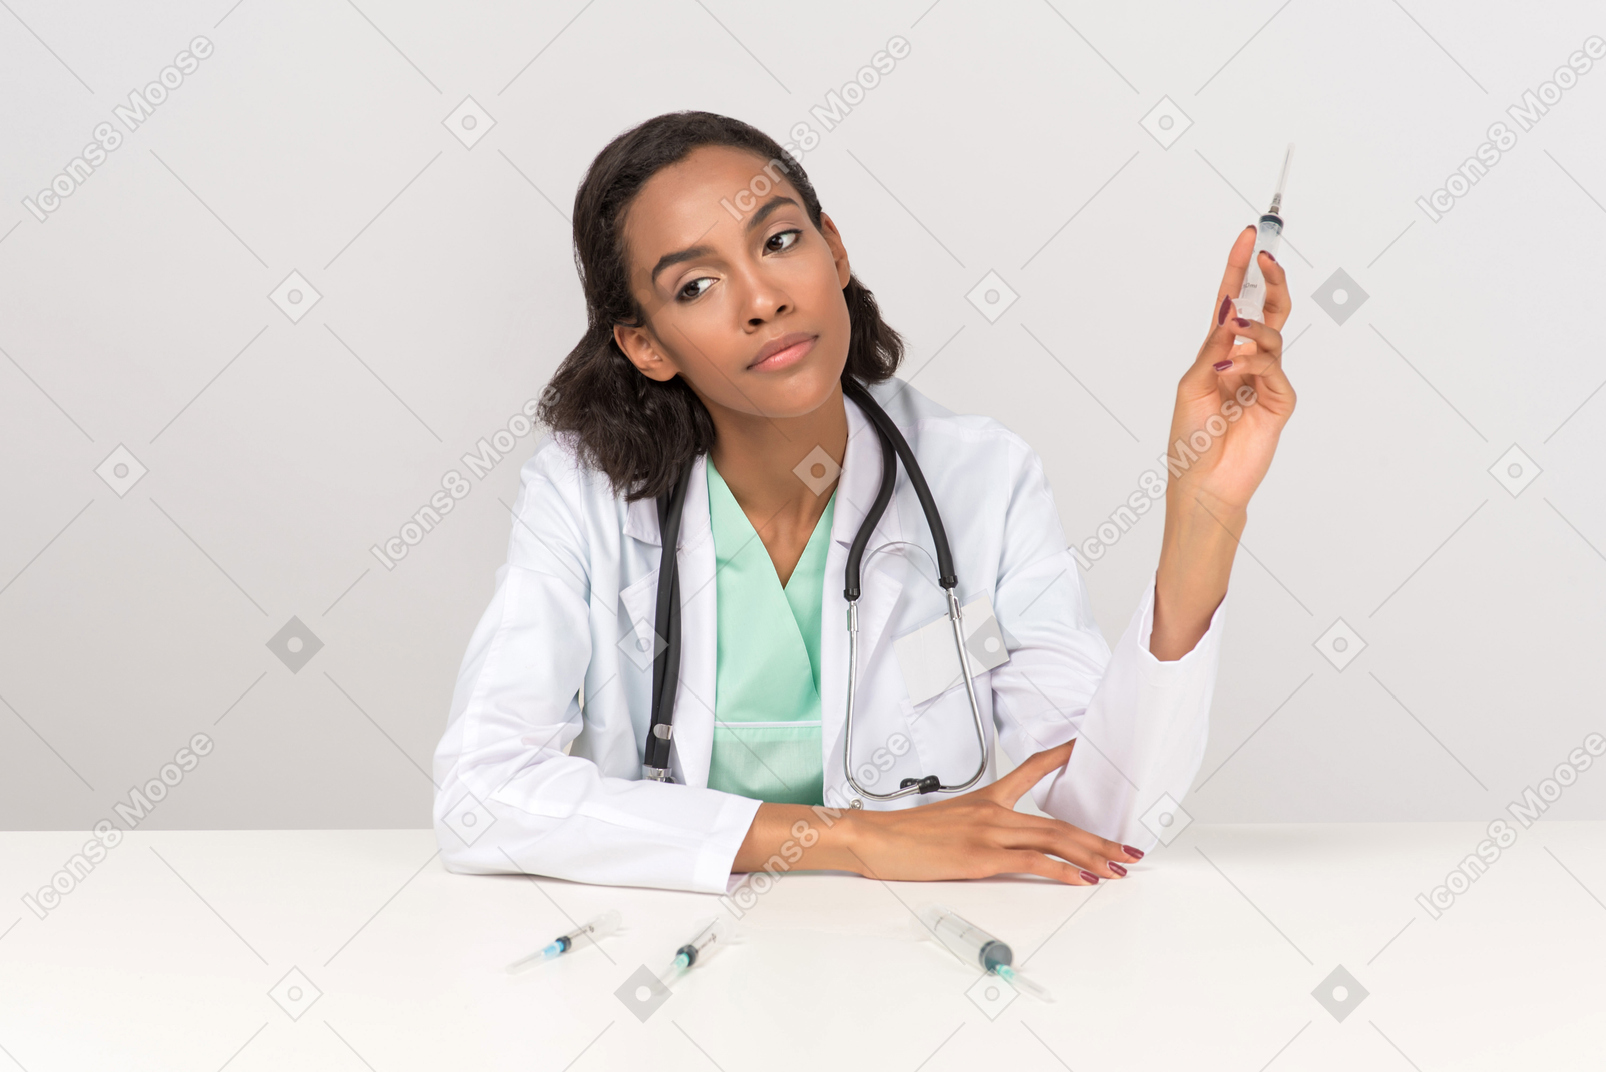 Doctors get tired of their routine too